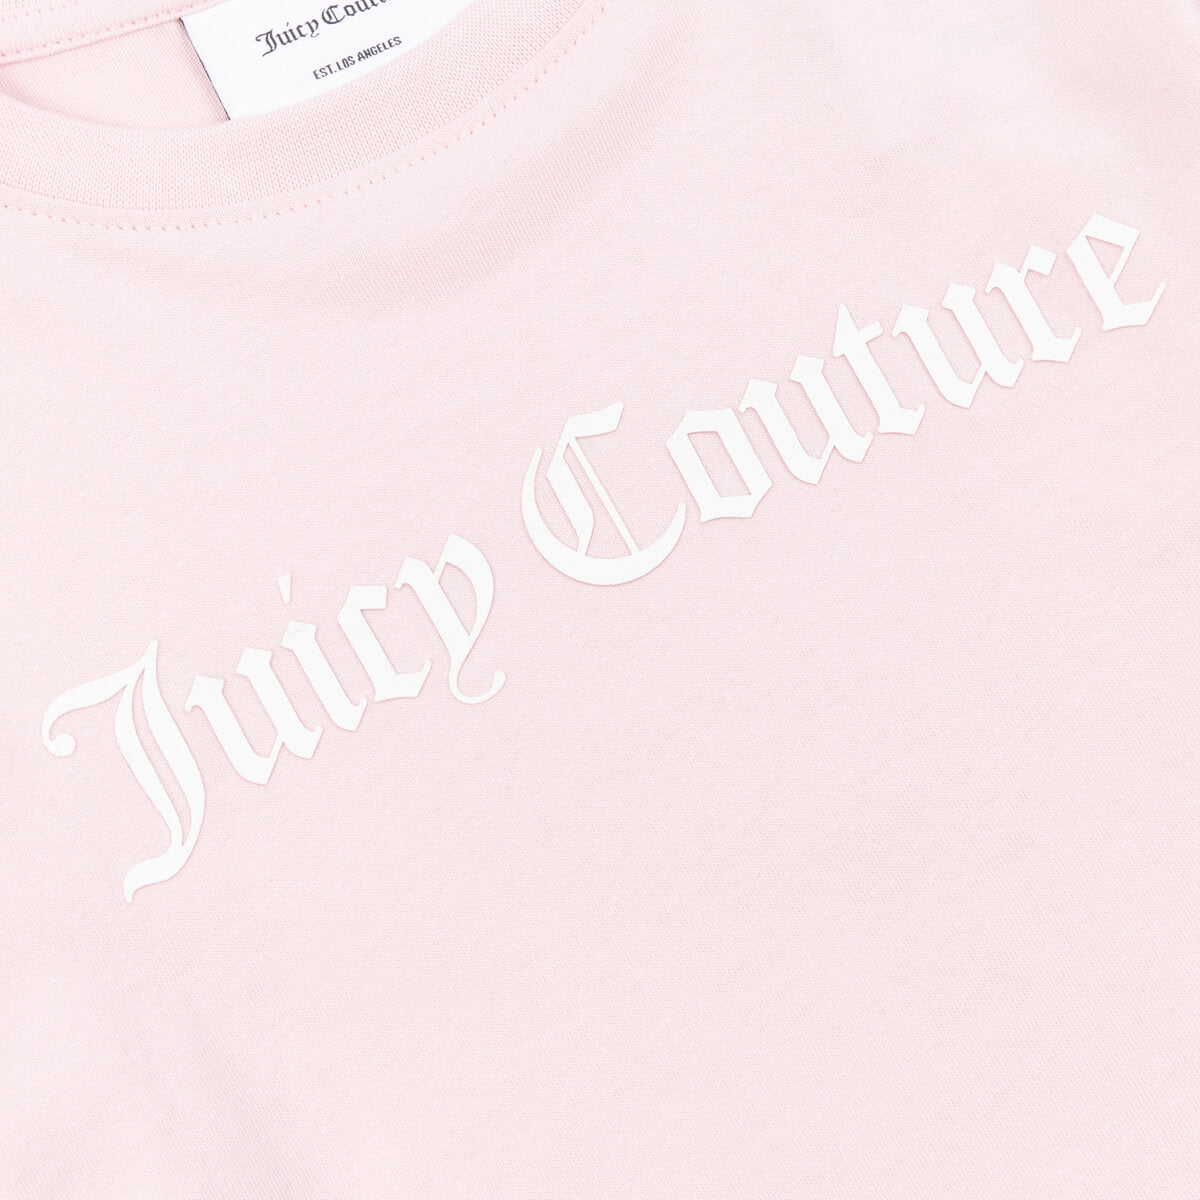 Juicy Couture Girls Pink Sleeve Panel T-Shirt